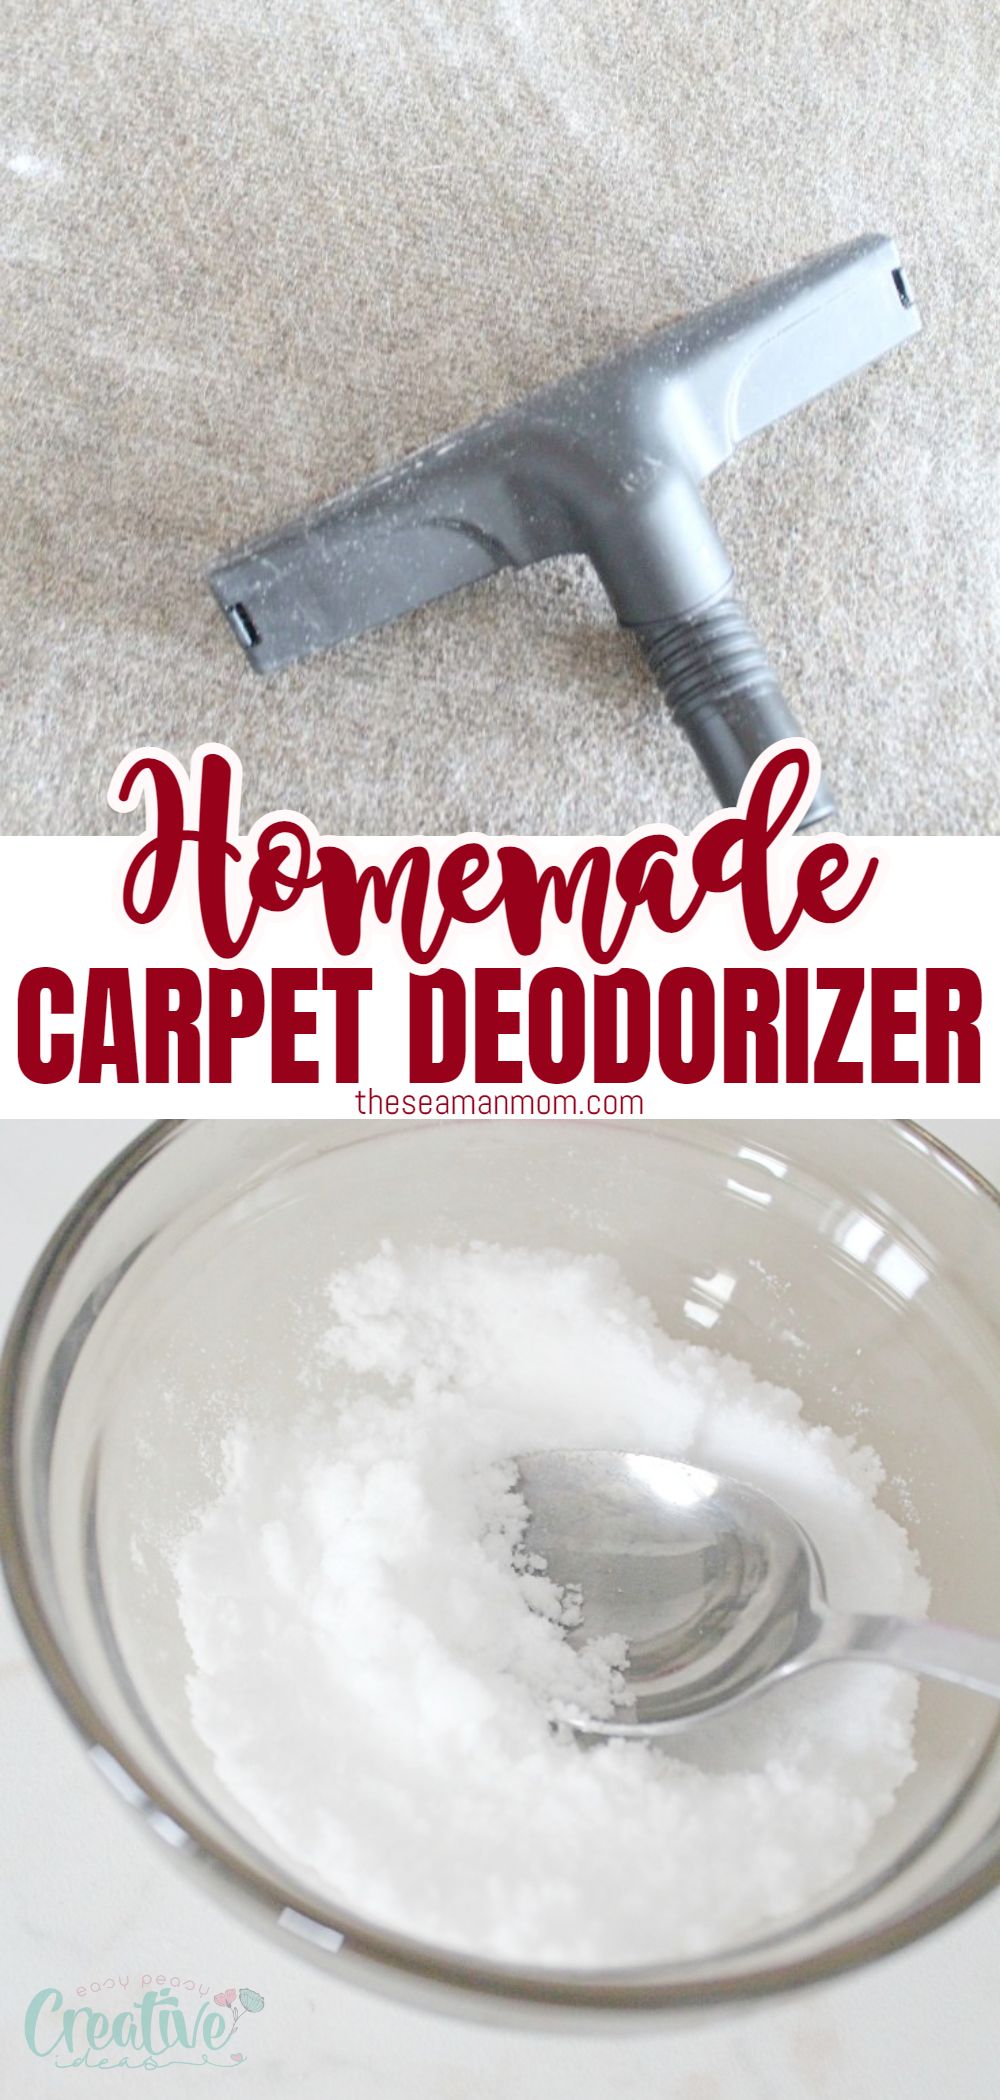 Looking to freshen up your carpets without spending a fortune? This DIY carpet deodorizer is the perfect solution! Made with just a few simple ingredients, this homemade carpet freshener will leave your carpets smelling fresh and clean. Plus, it's quick and easy to make so you can get back to enjoying your freshly-scented home in no time! via @petroneagu